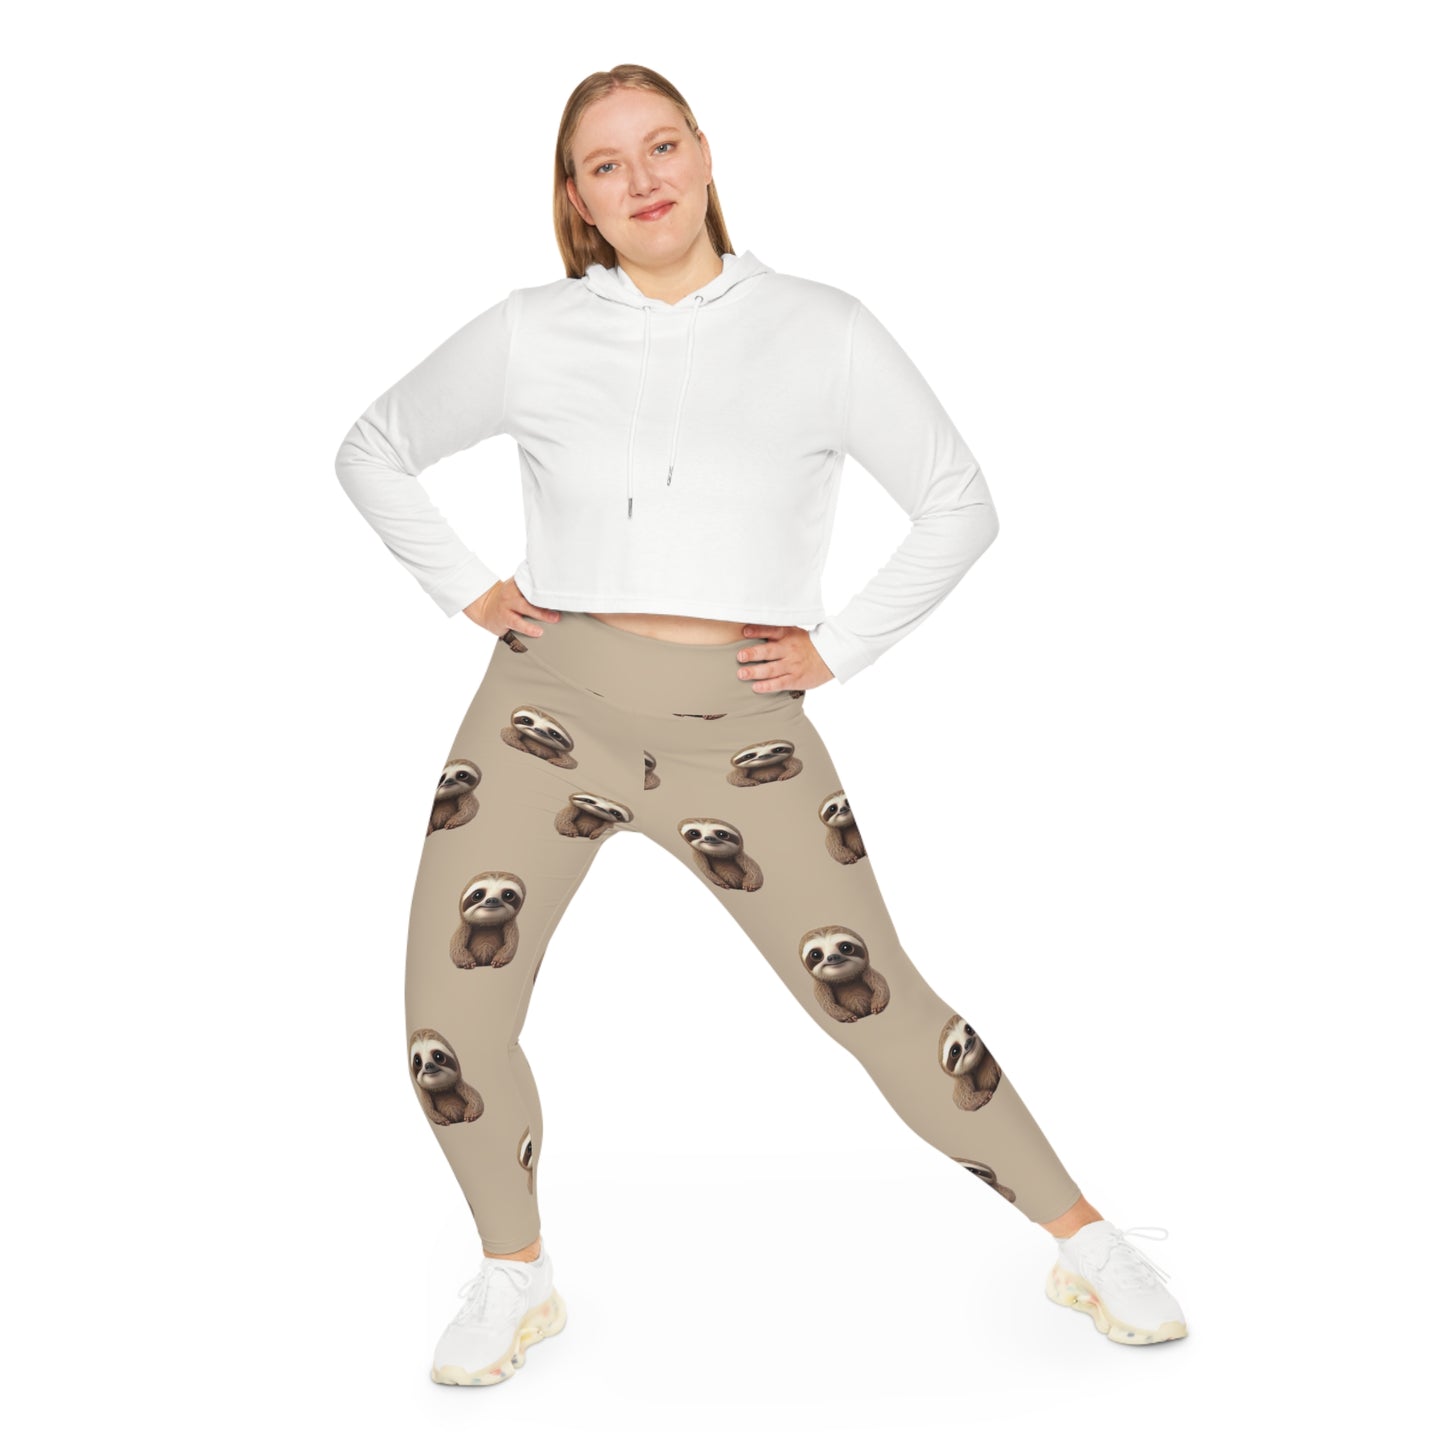 Sloth Plus Size Leggings One of a Kind Gift - Unique Workout Activewear tights for Mom fitness, Mothers Day, Girlfriend Christmas Gift